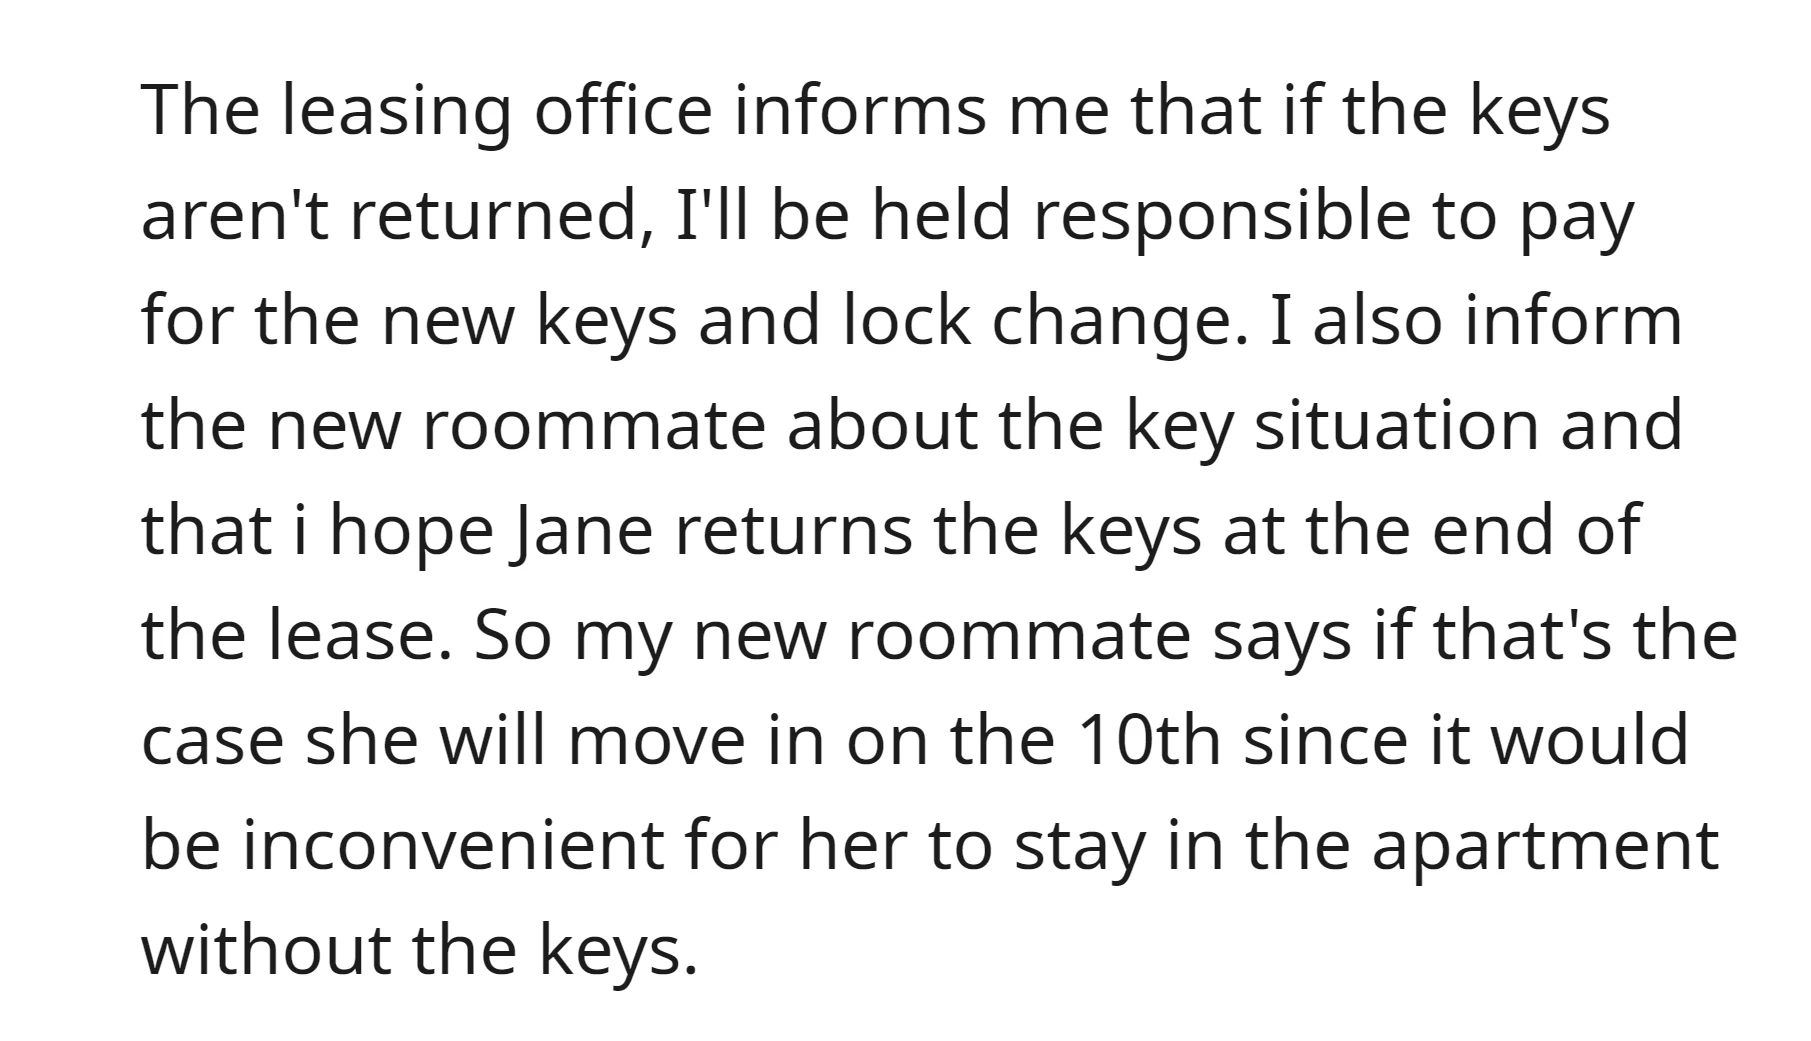 The new roommate decides to delay moving because she doesn't have the keys that Jane is holding